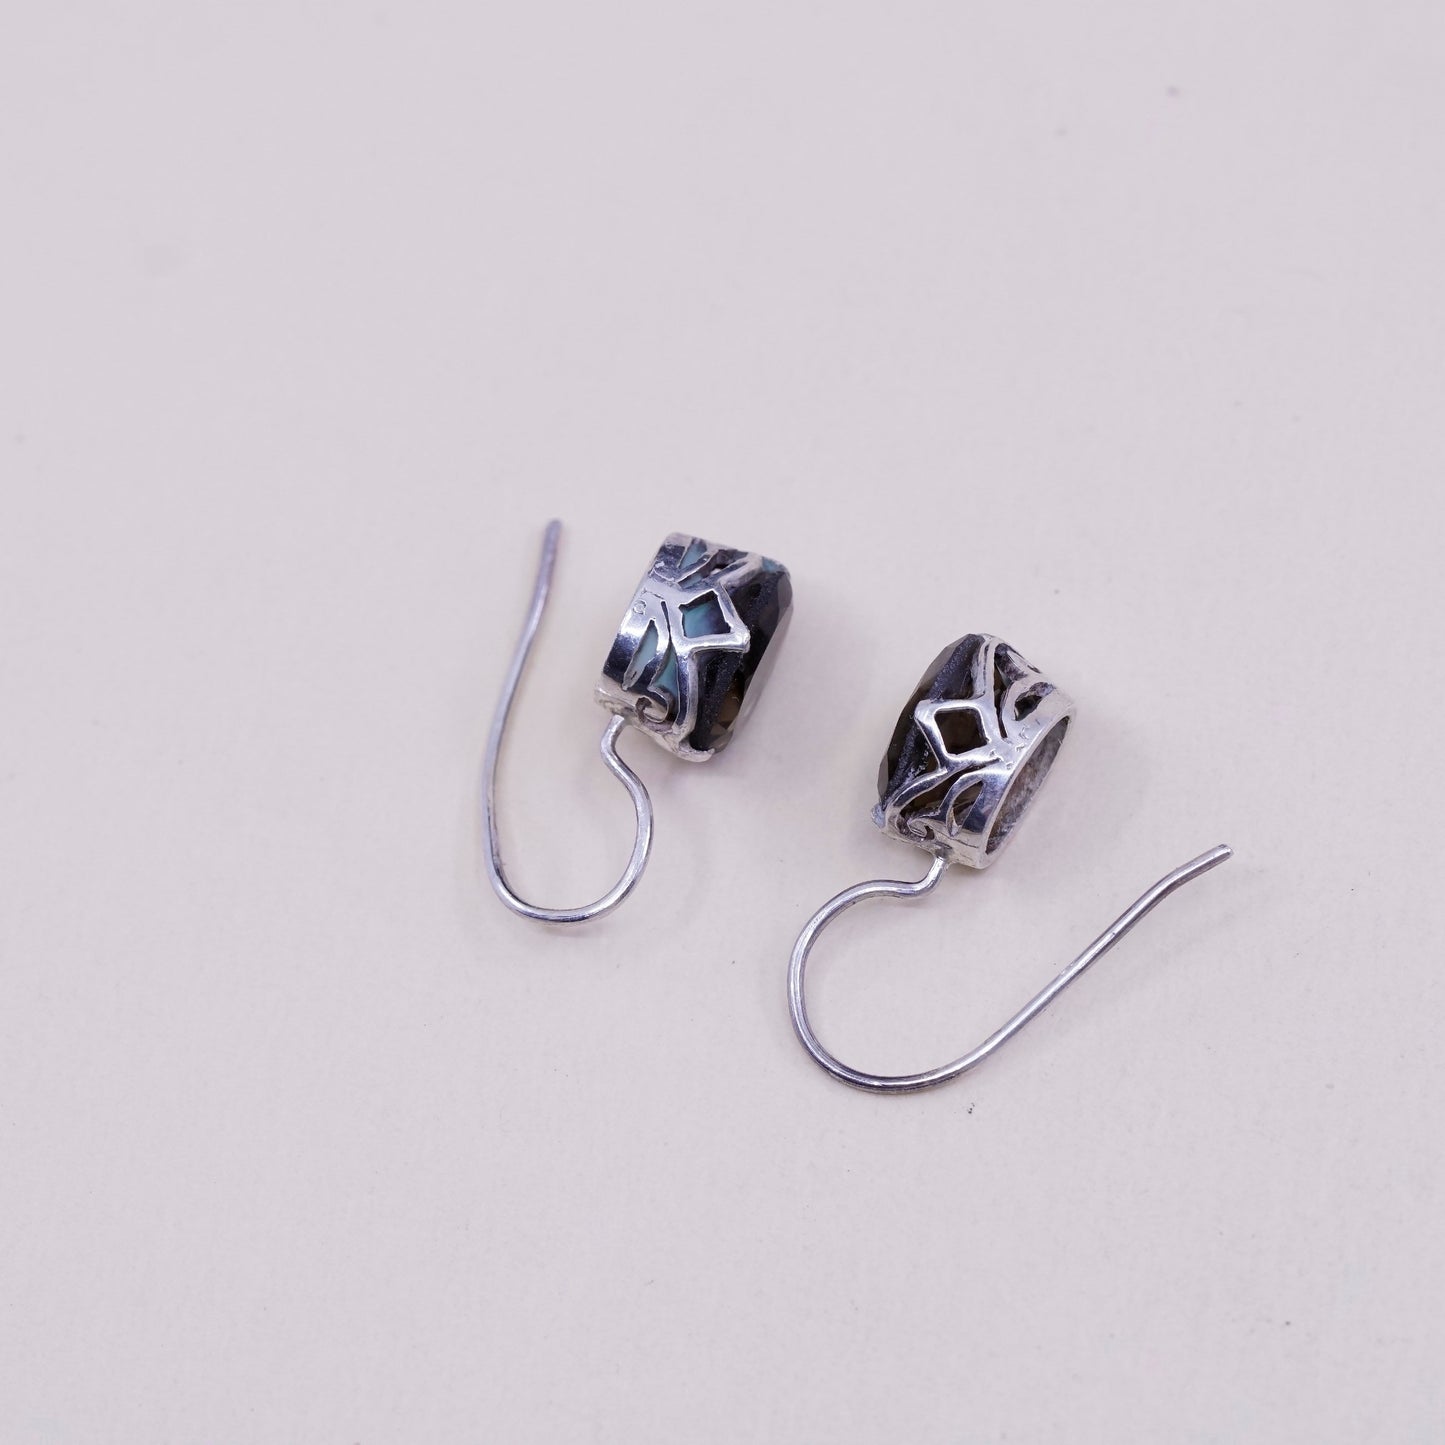 Vintage Sterling 925 silver handmade earrings with smoky topaz beads